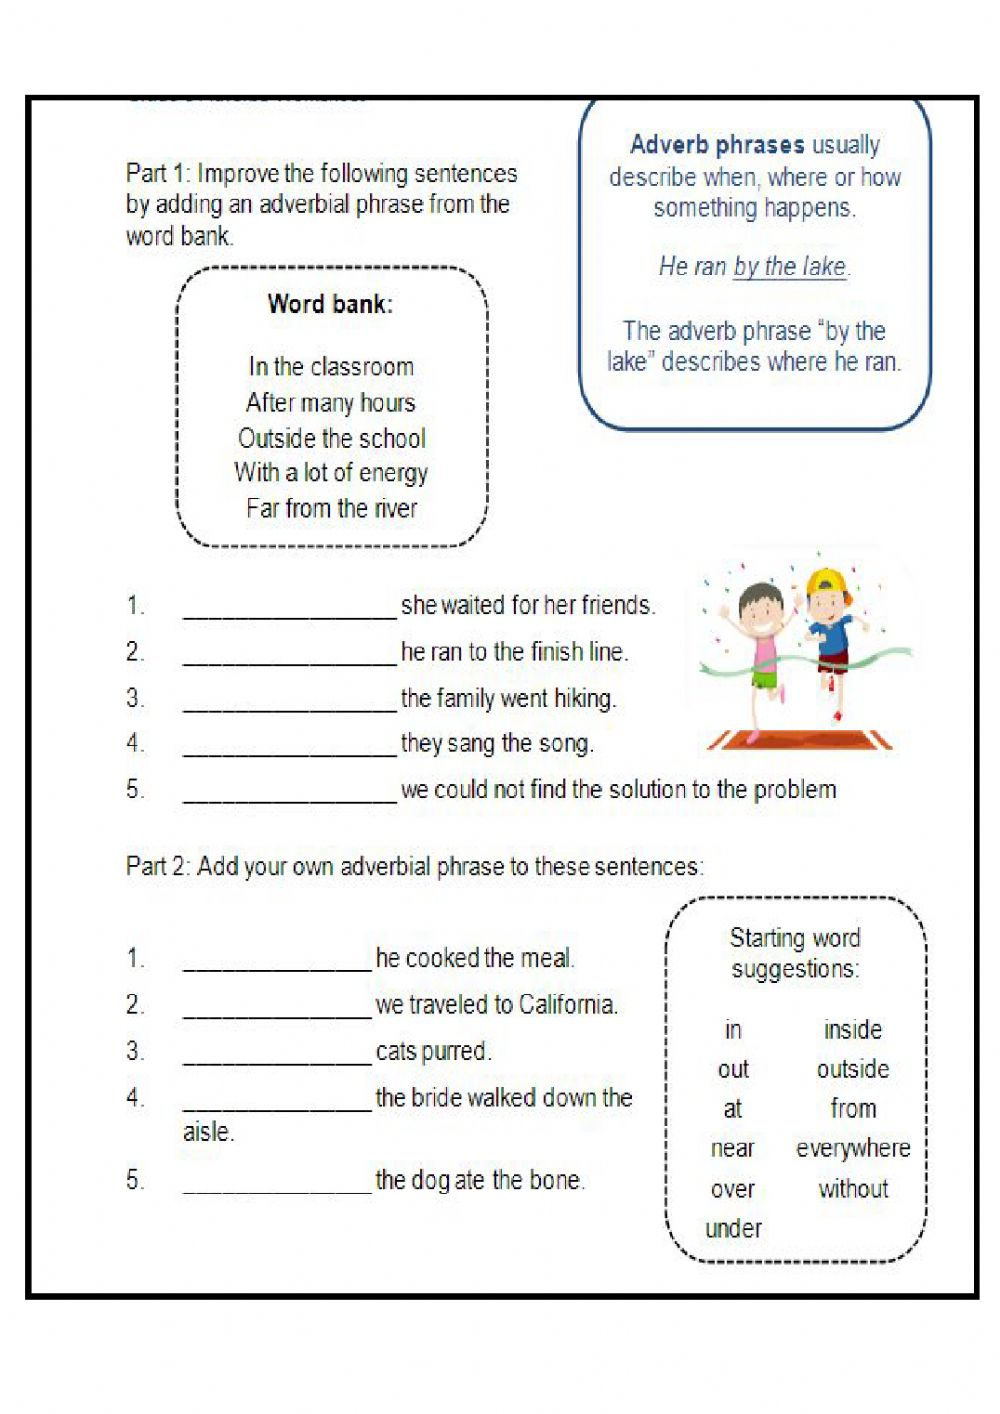 adjective-and-adverb-phrases-worksheets-with-answer-key-adverbworksheets